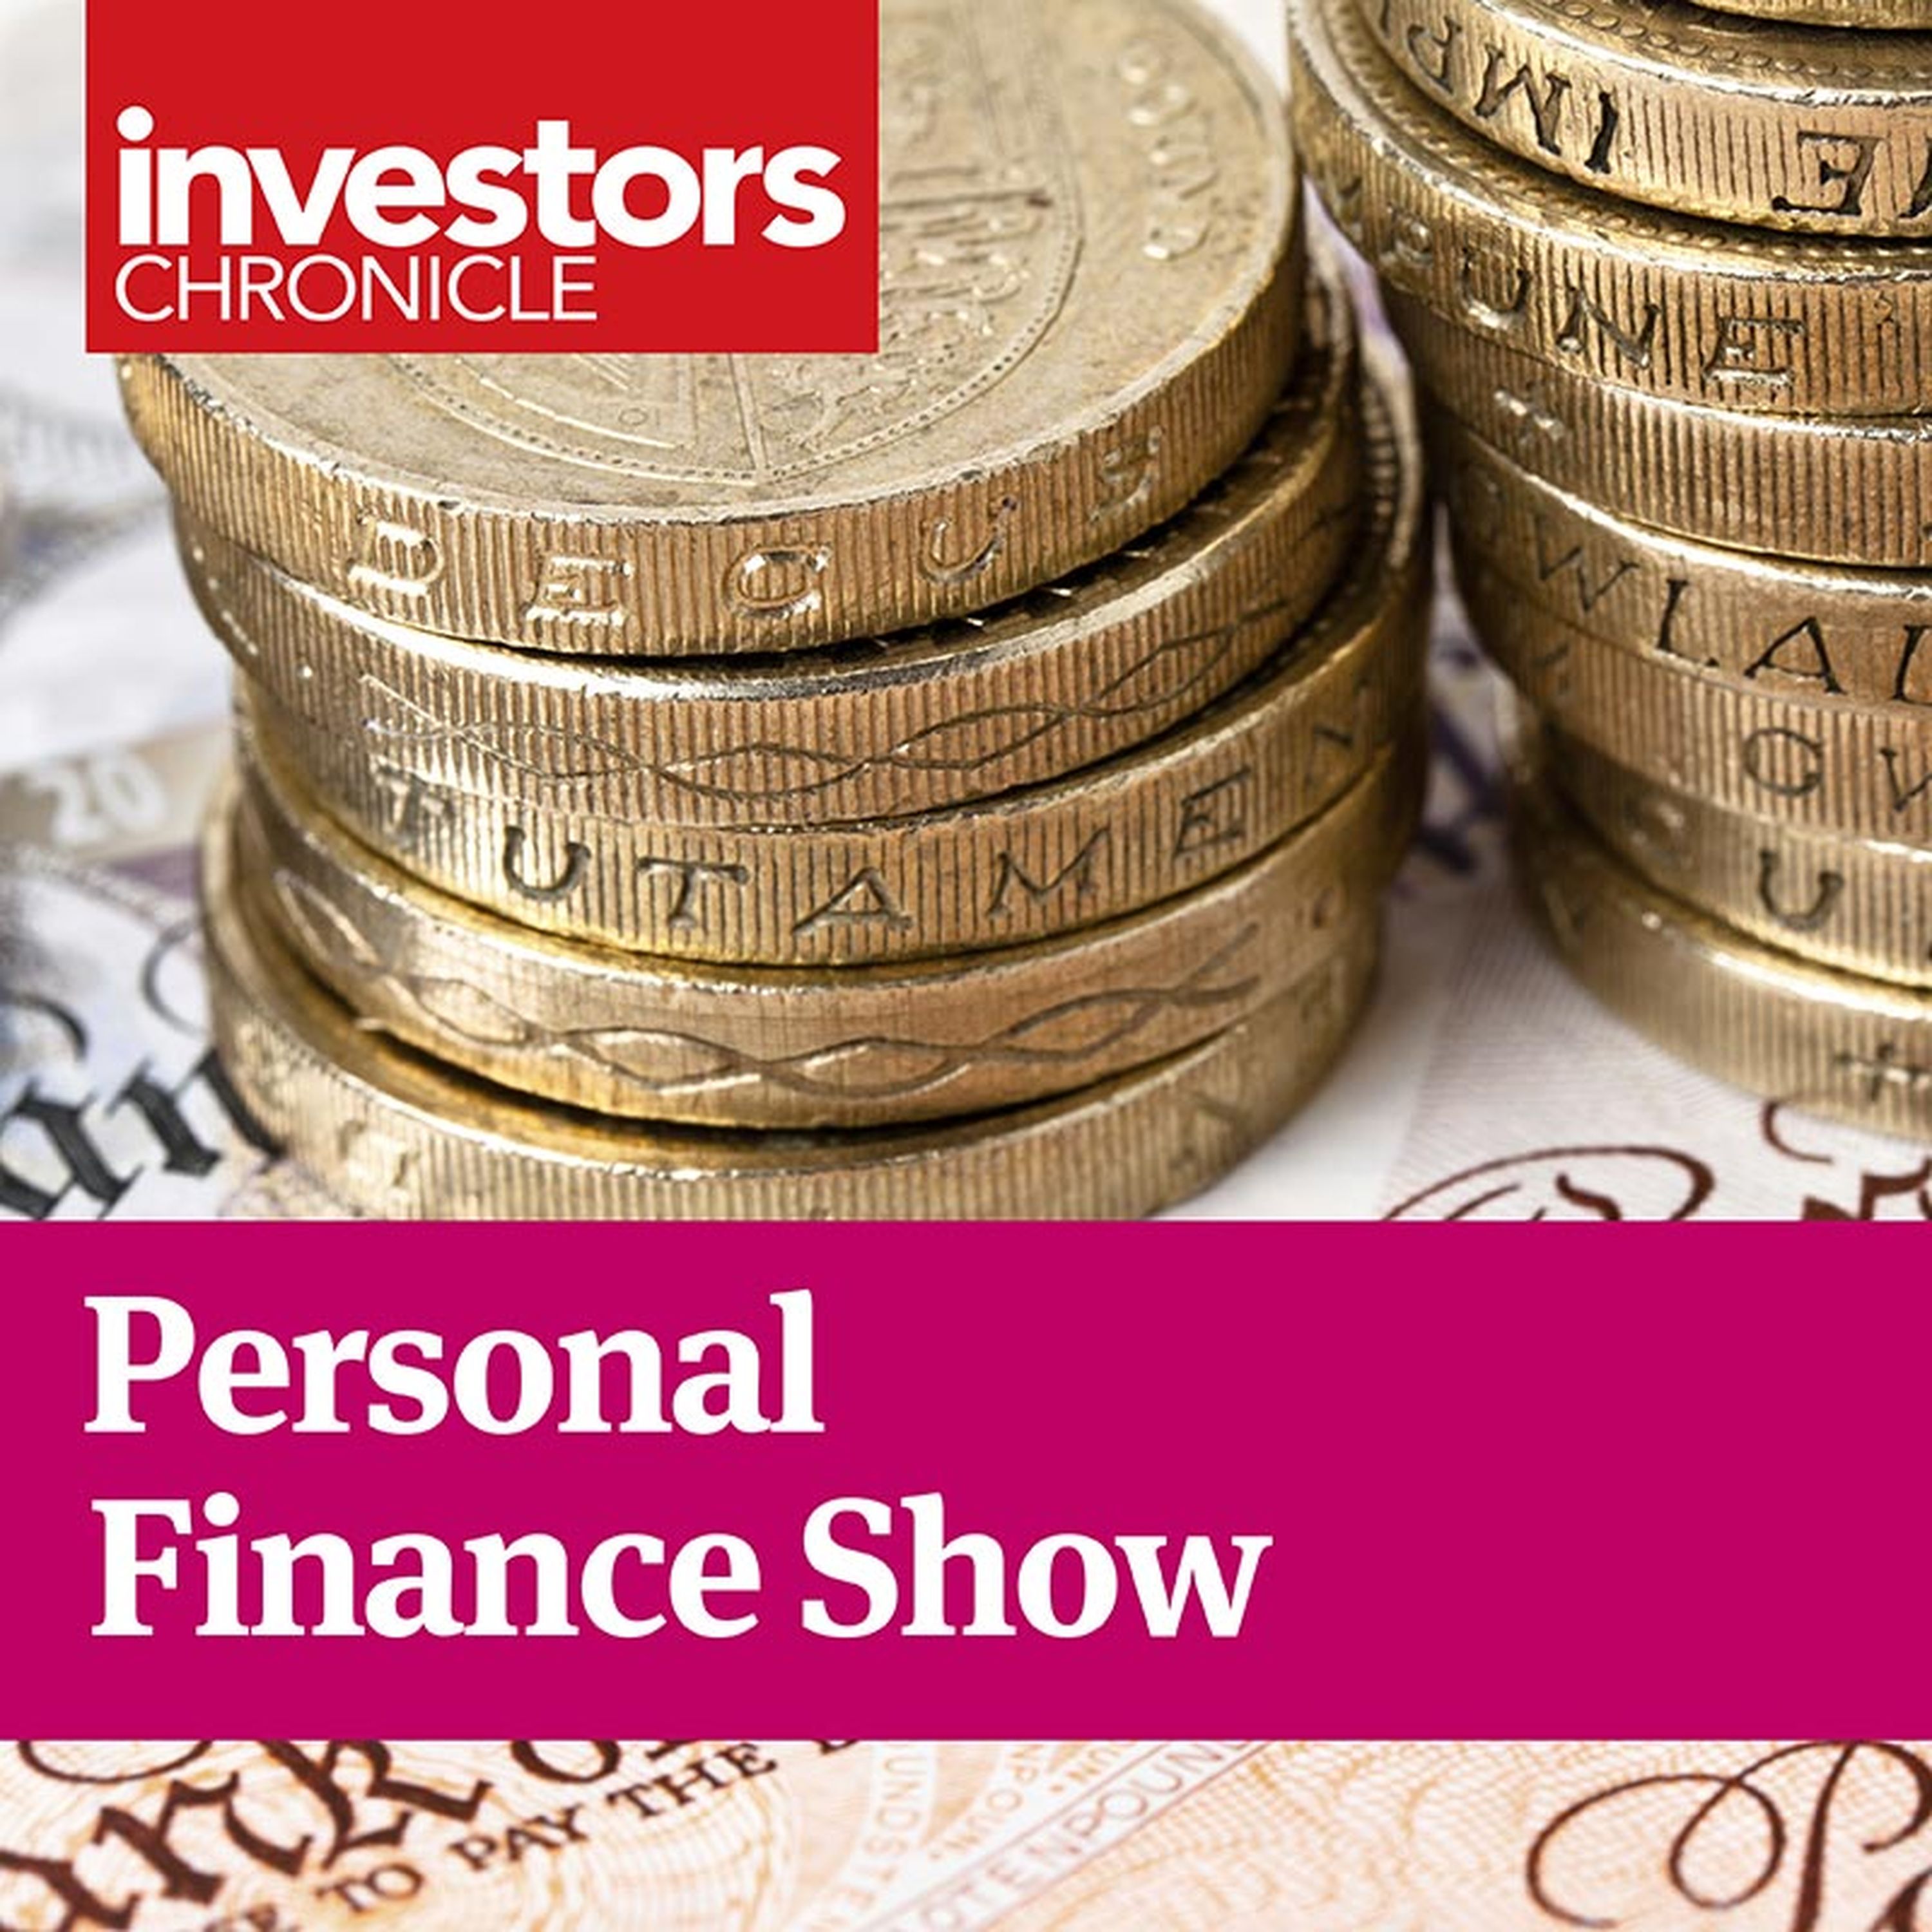 Personal Finance Show: Income fund stars and fund fees explained